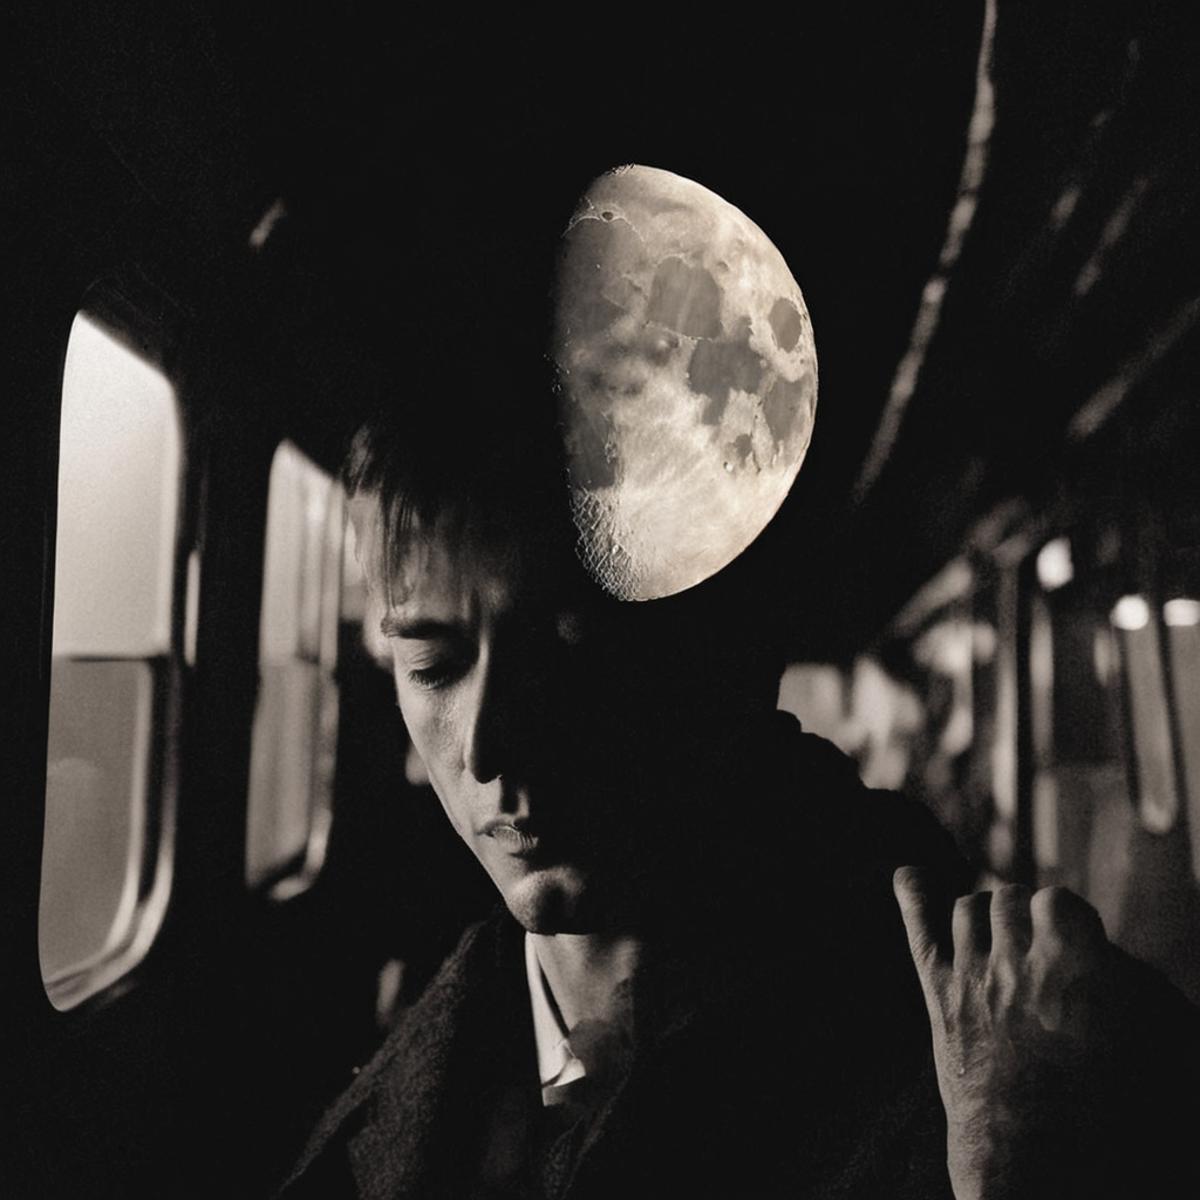 Man looking out of the window with a moon above his head.